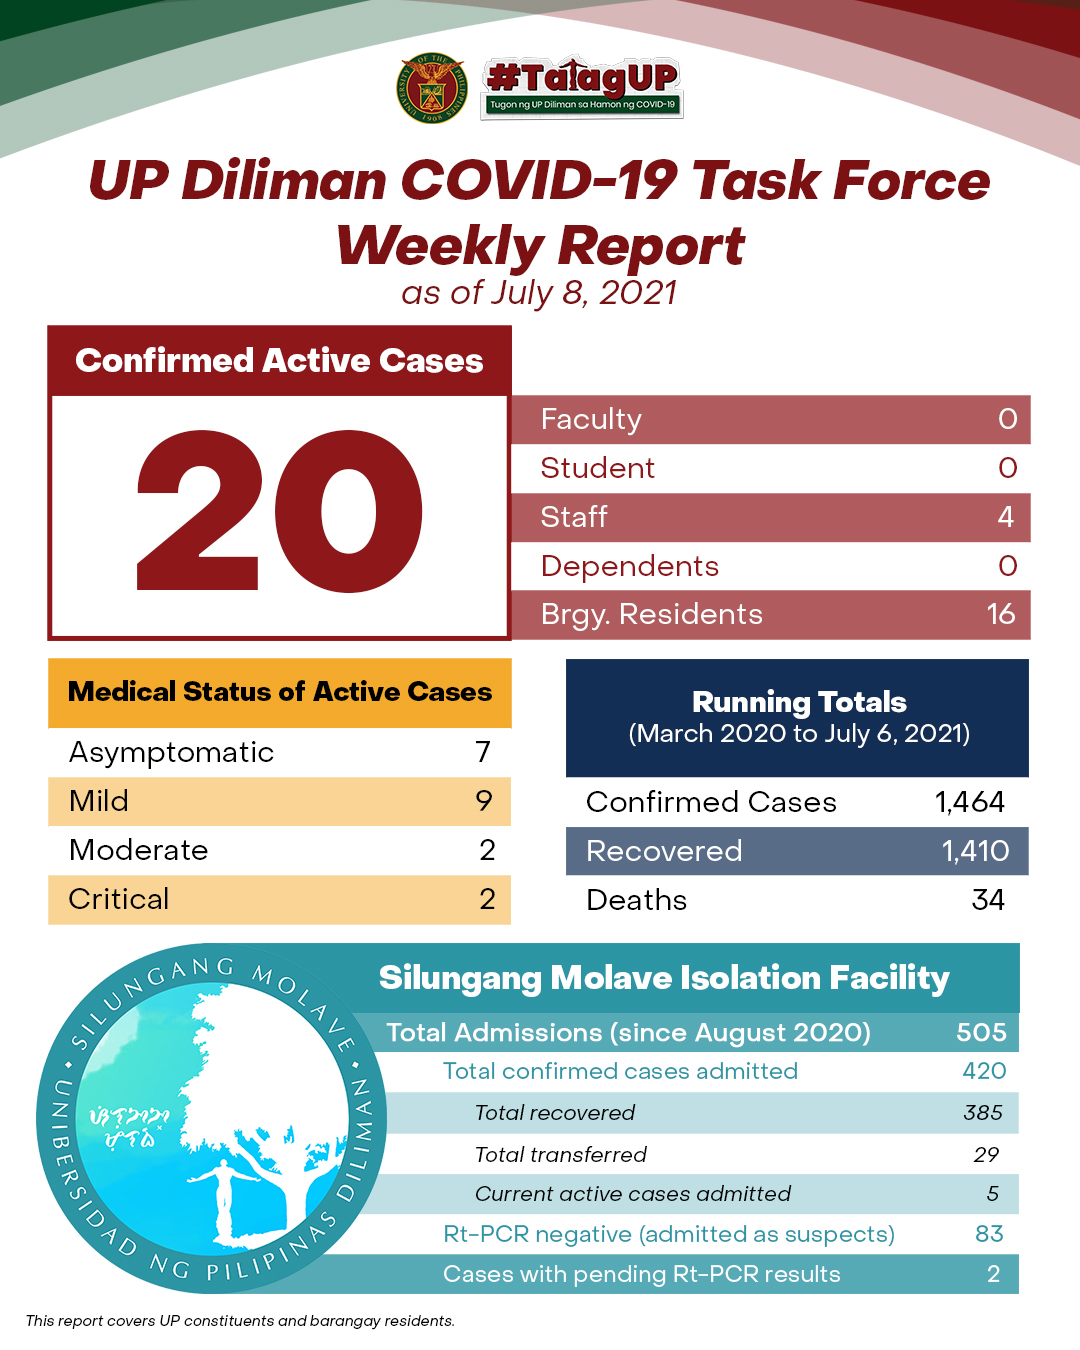 UP Diliman COVID-19 Task Force Weekly Report as of July 8, 2021